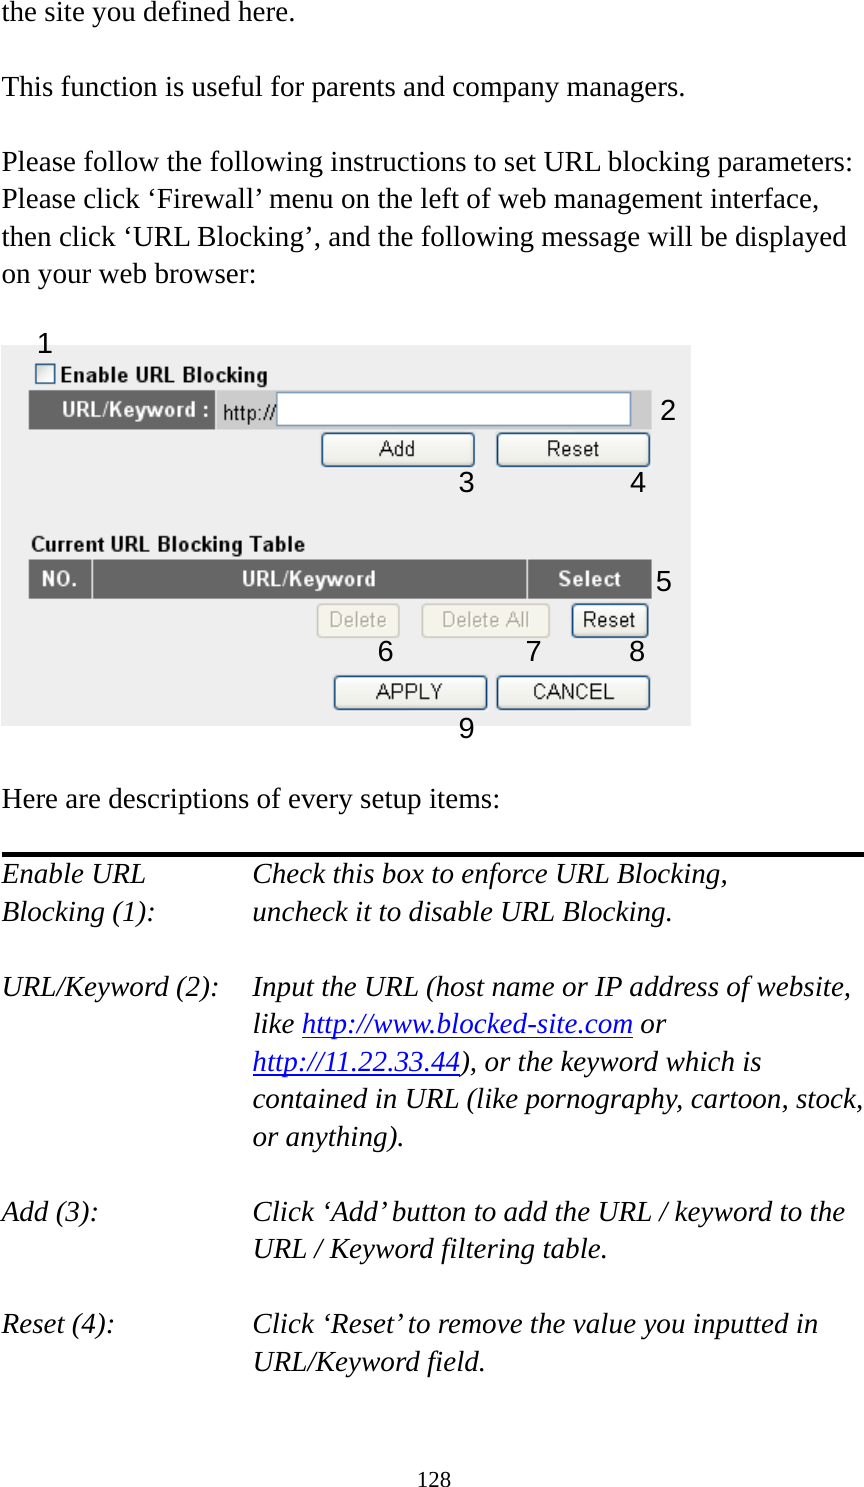 128 the site you defined here.  This function is useful for parents and company managers.  Please follow the following instructions to set URL blocking parameters: Please click ‘Firewall’ menu on the left of web management interface, then click ‘URL Blocking’, and the following message will be displayed on your web browser:    Here are descriptions of every setup items:  Enable URL      Check this box to enforce URL Blocking, Blocking (1):      uncheck it to disable URL Blocking.  URL/Keyword (2):    Input the URL (host name or IP address of website, like http://www.blocked-site.com or http://11.22.33.44), or the keyword which is contained in URL (like pornography, cartoon, stock, or anything).  Add (3):    Click ‘Add’ button to add the URL / keyword to the URL / Keyword filtering table.  Reset (4):    Click ‘Reset’ to remove the value you inputted in URL/Keyword field.  2 3 4 5 6 7 8 9 1 